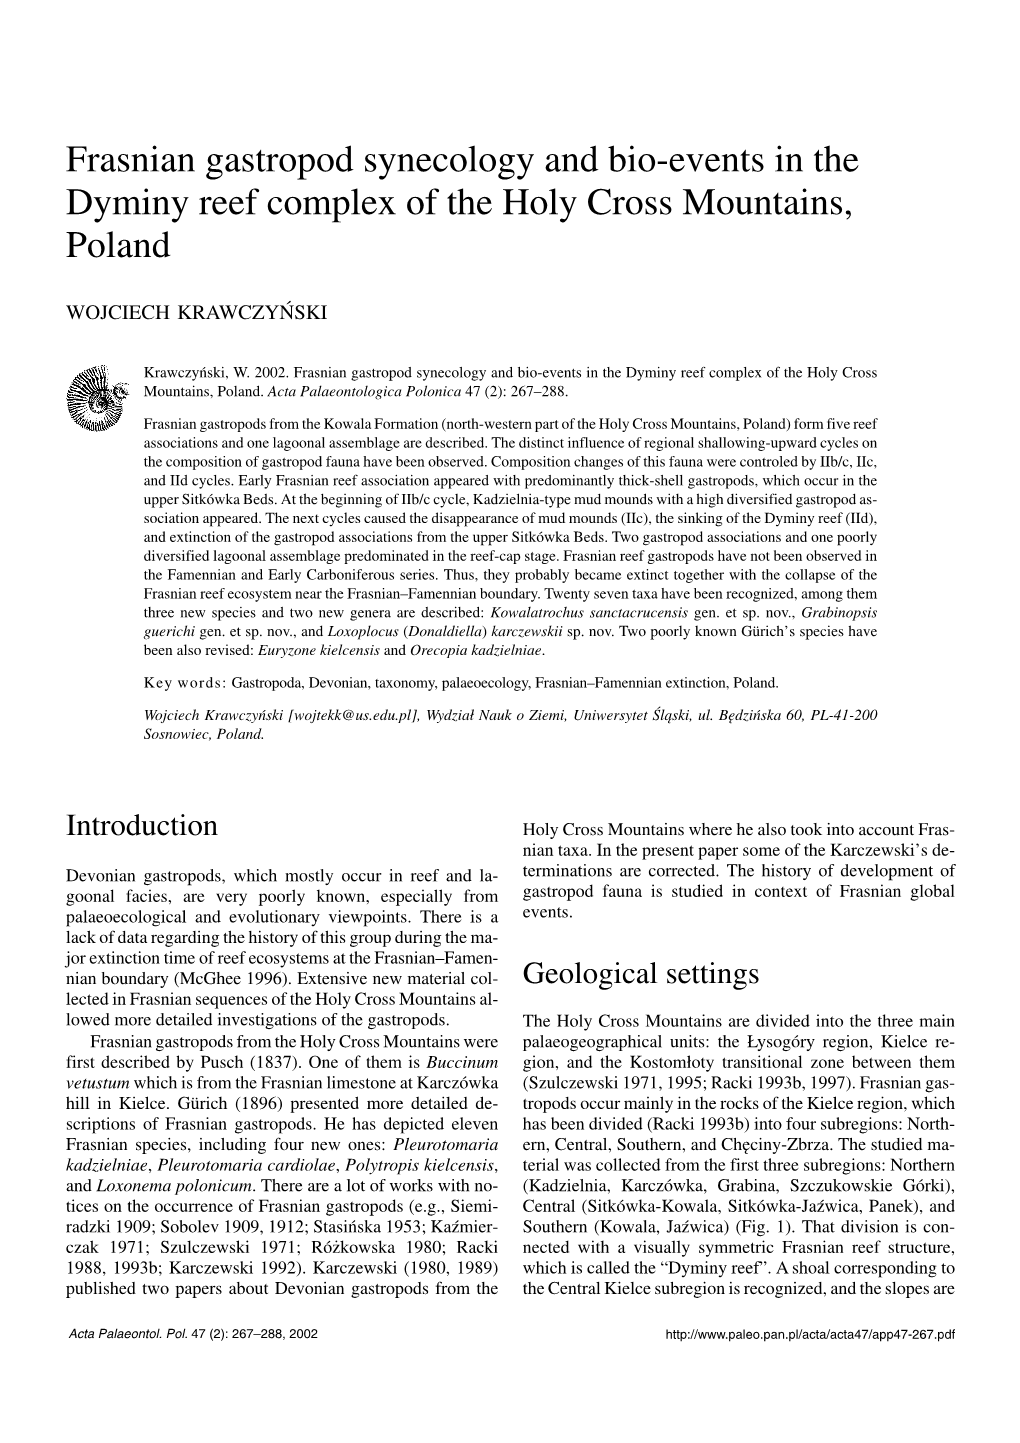 Frasnian Gastropod Synecology and Bio−Events in the Dyminy Reef Complex of the Holy Cross Mountains, Poland